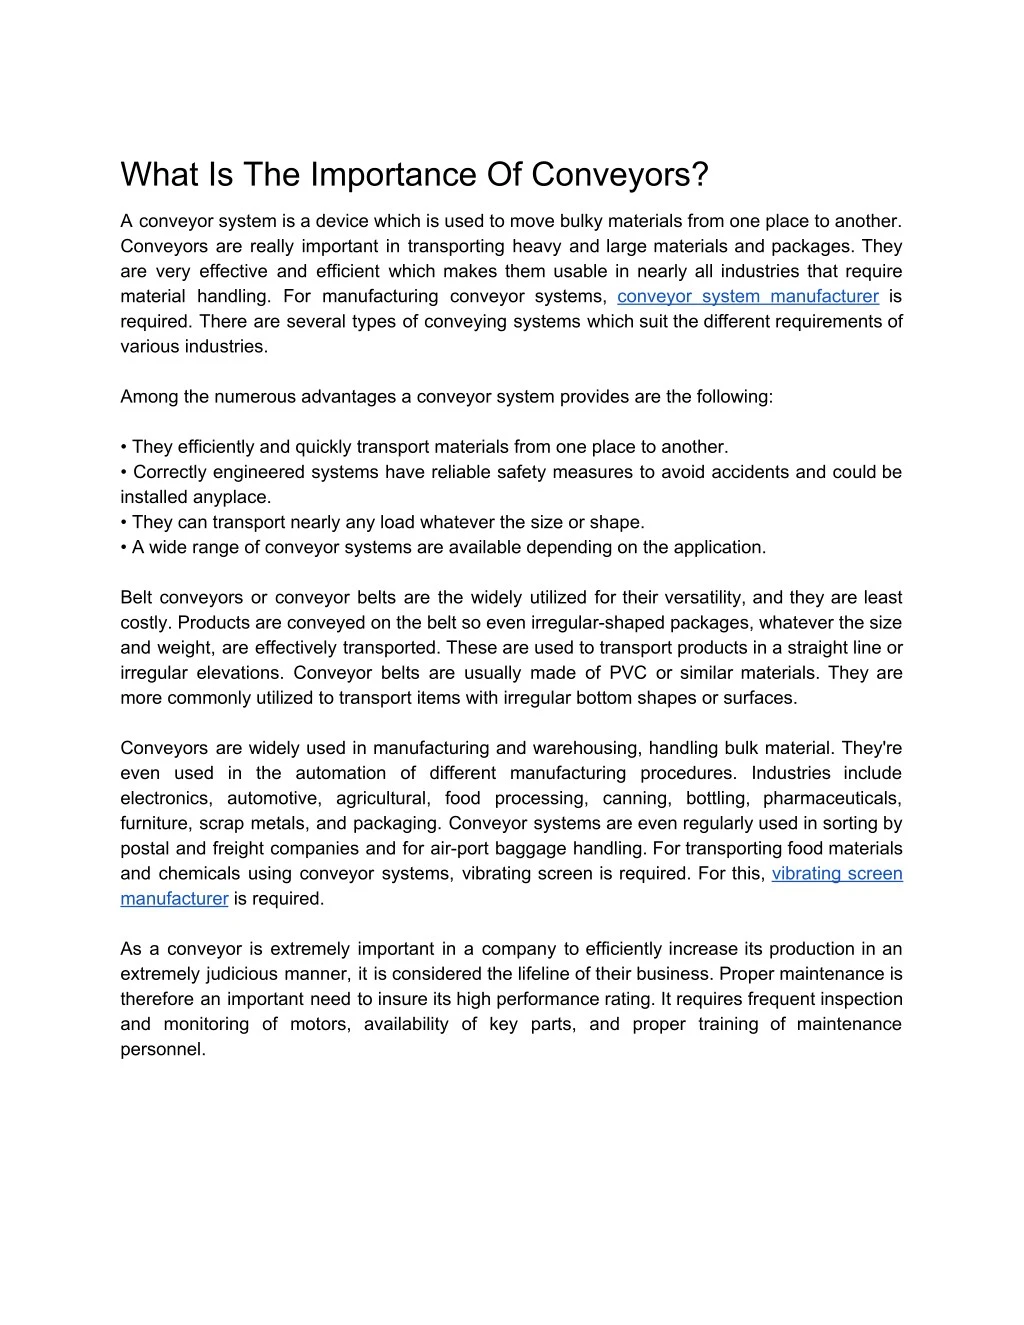 what is the importance of conveyors